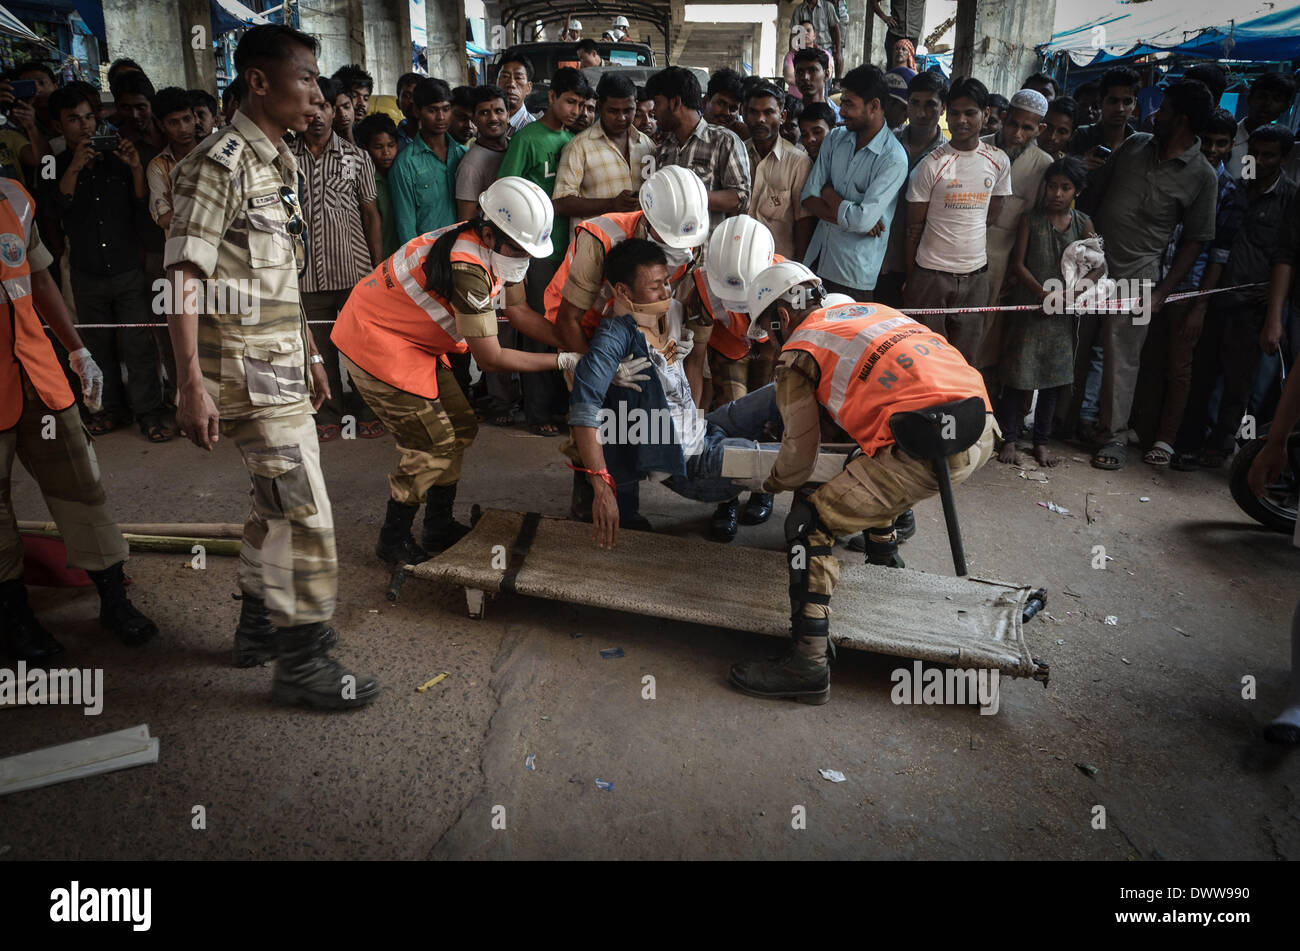 Dimapur, India. 13th Mar, 2014. Nagaland State Disaster Response Force (NSDRF) put a man in a stretcher pretending to be injured as onlookers watch during an earthquake mock drill in Dimapur, India north eastern state of Nagaland on Thursday, March 13, 2014. The entire north east India are exercising earthquake mock drill, also one of the biggest mock drill in South East Asia aiming to assess multi-state disaster preparedness, for the fear of 1897's 8.7 magnitude Shillong earthquake replication. Credit:  ZUMA Press, Inc./Alamy Live News Stock Photo